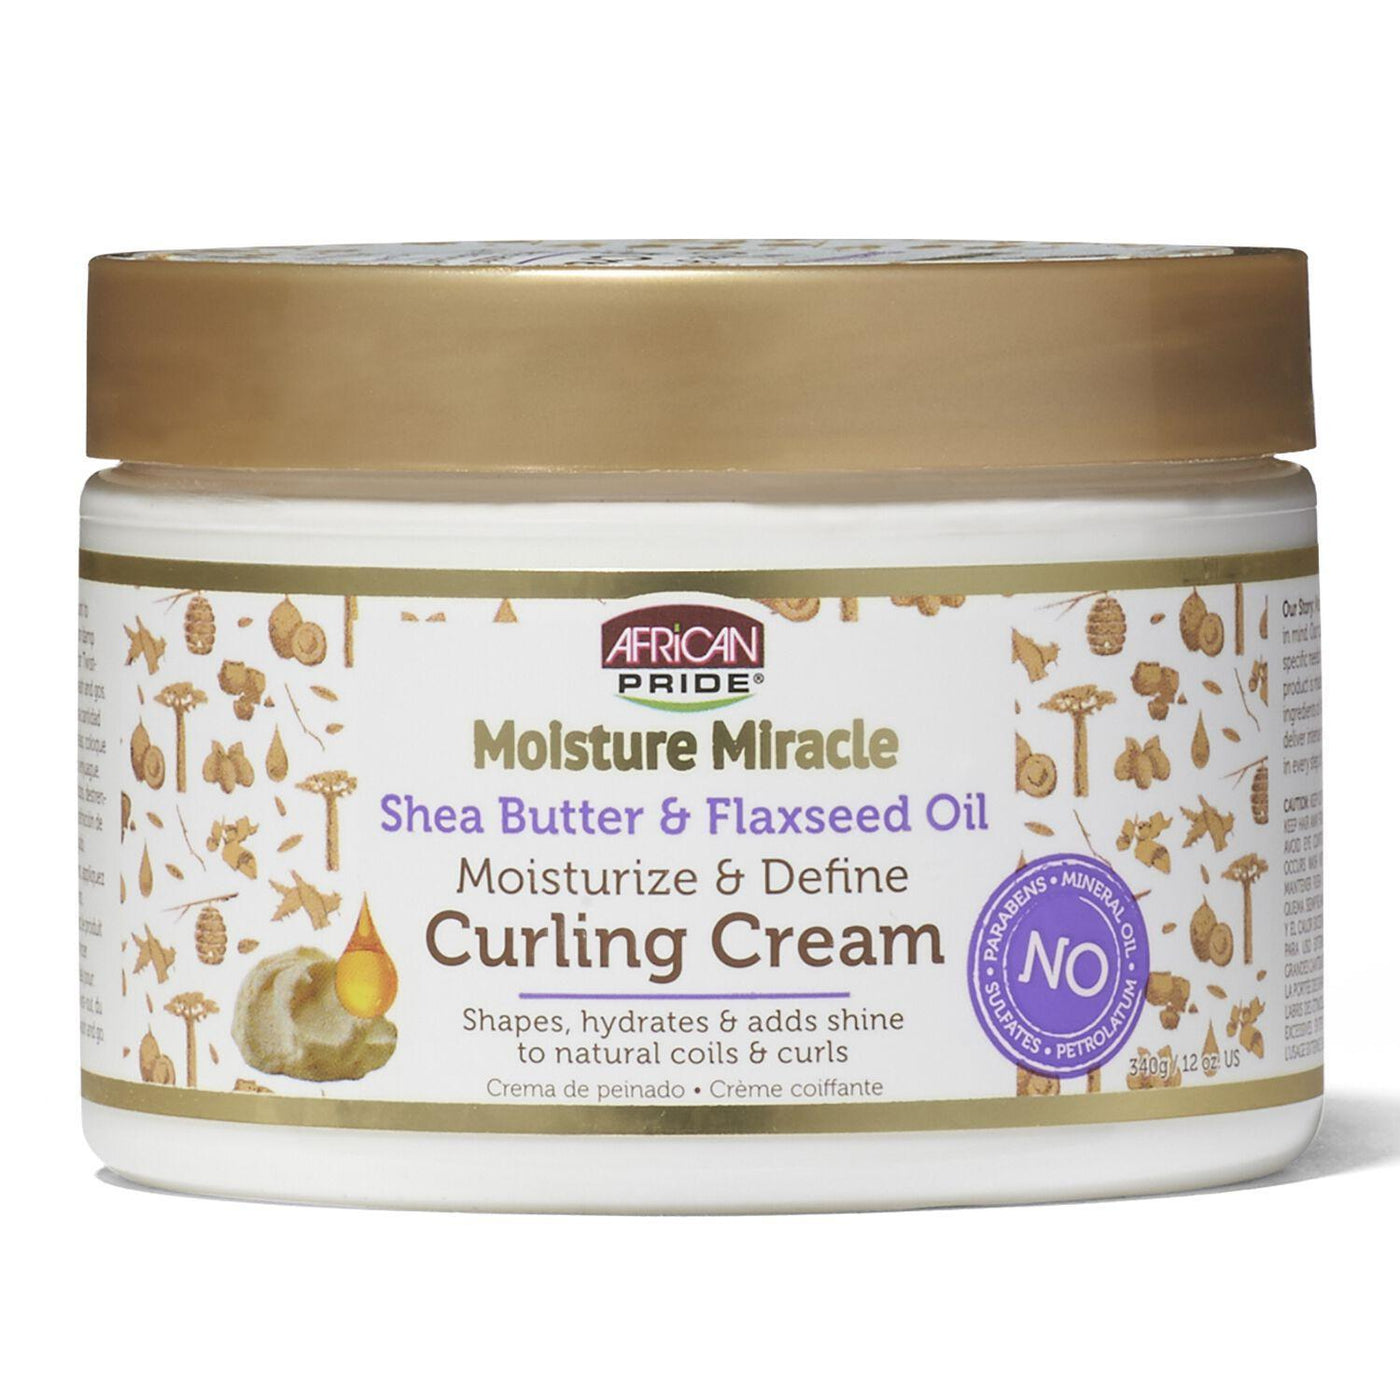 African Pride Moisture Miracle Shea Butter & Flaxseed Oil Curling Cream (12 oz)